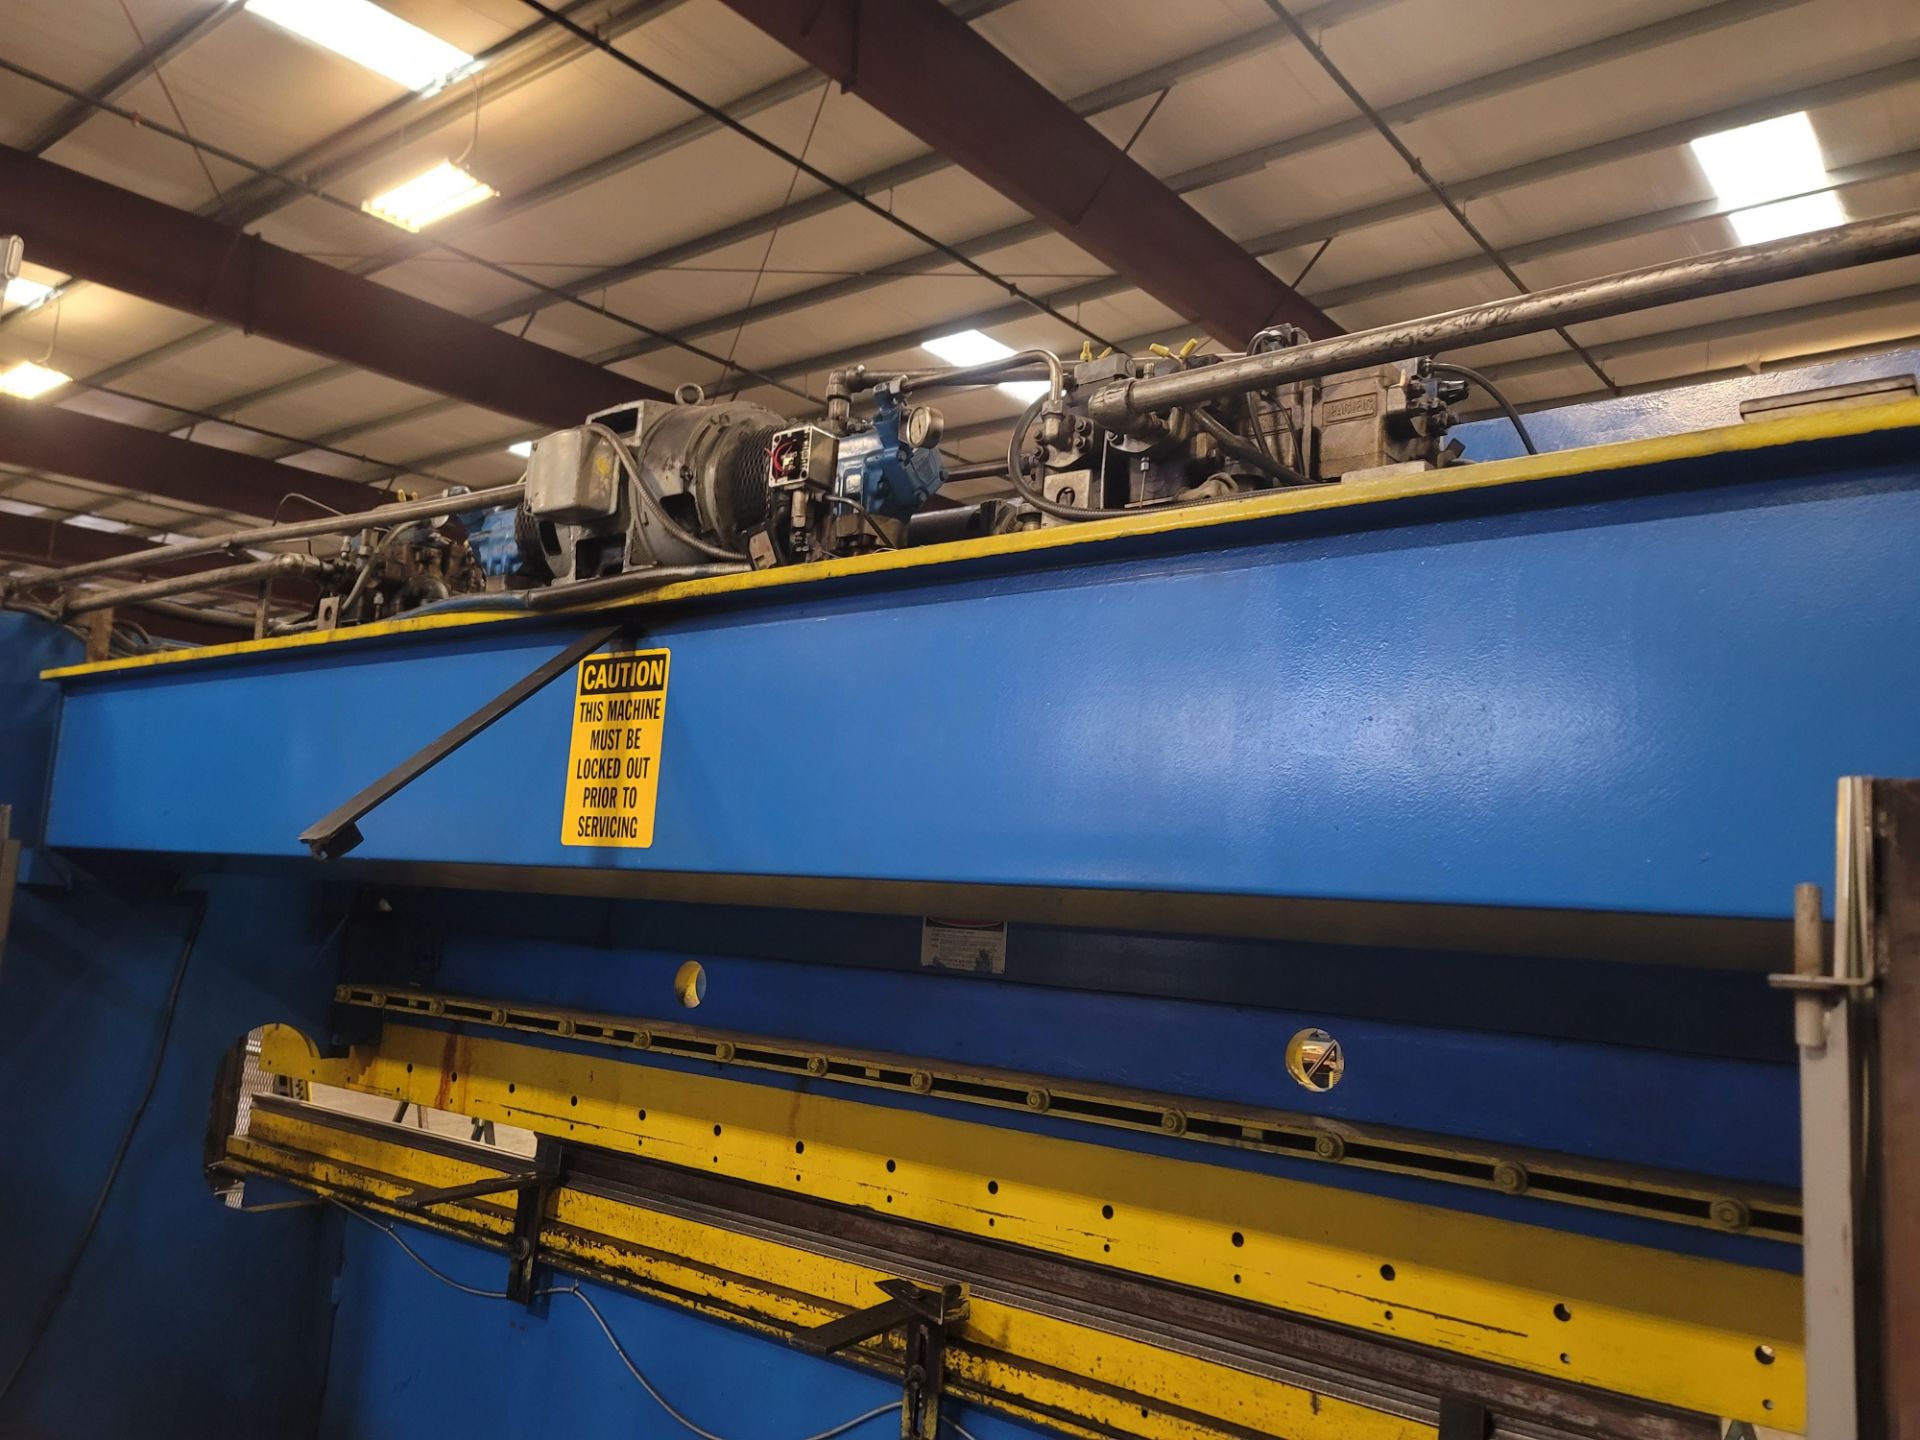 PACIFIC K175-21 PRESS BRAKE, 3/16" X 21', HYDRAULIC, PROTECH EAGLE EYE GUARDING SYSTEM, S/N 8902 - Image 11 of 12